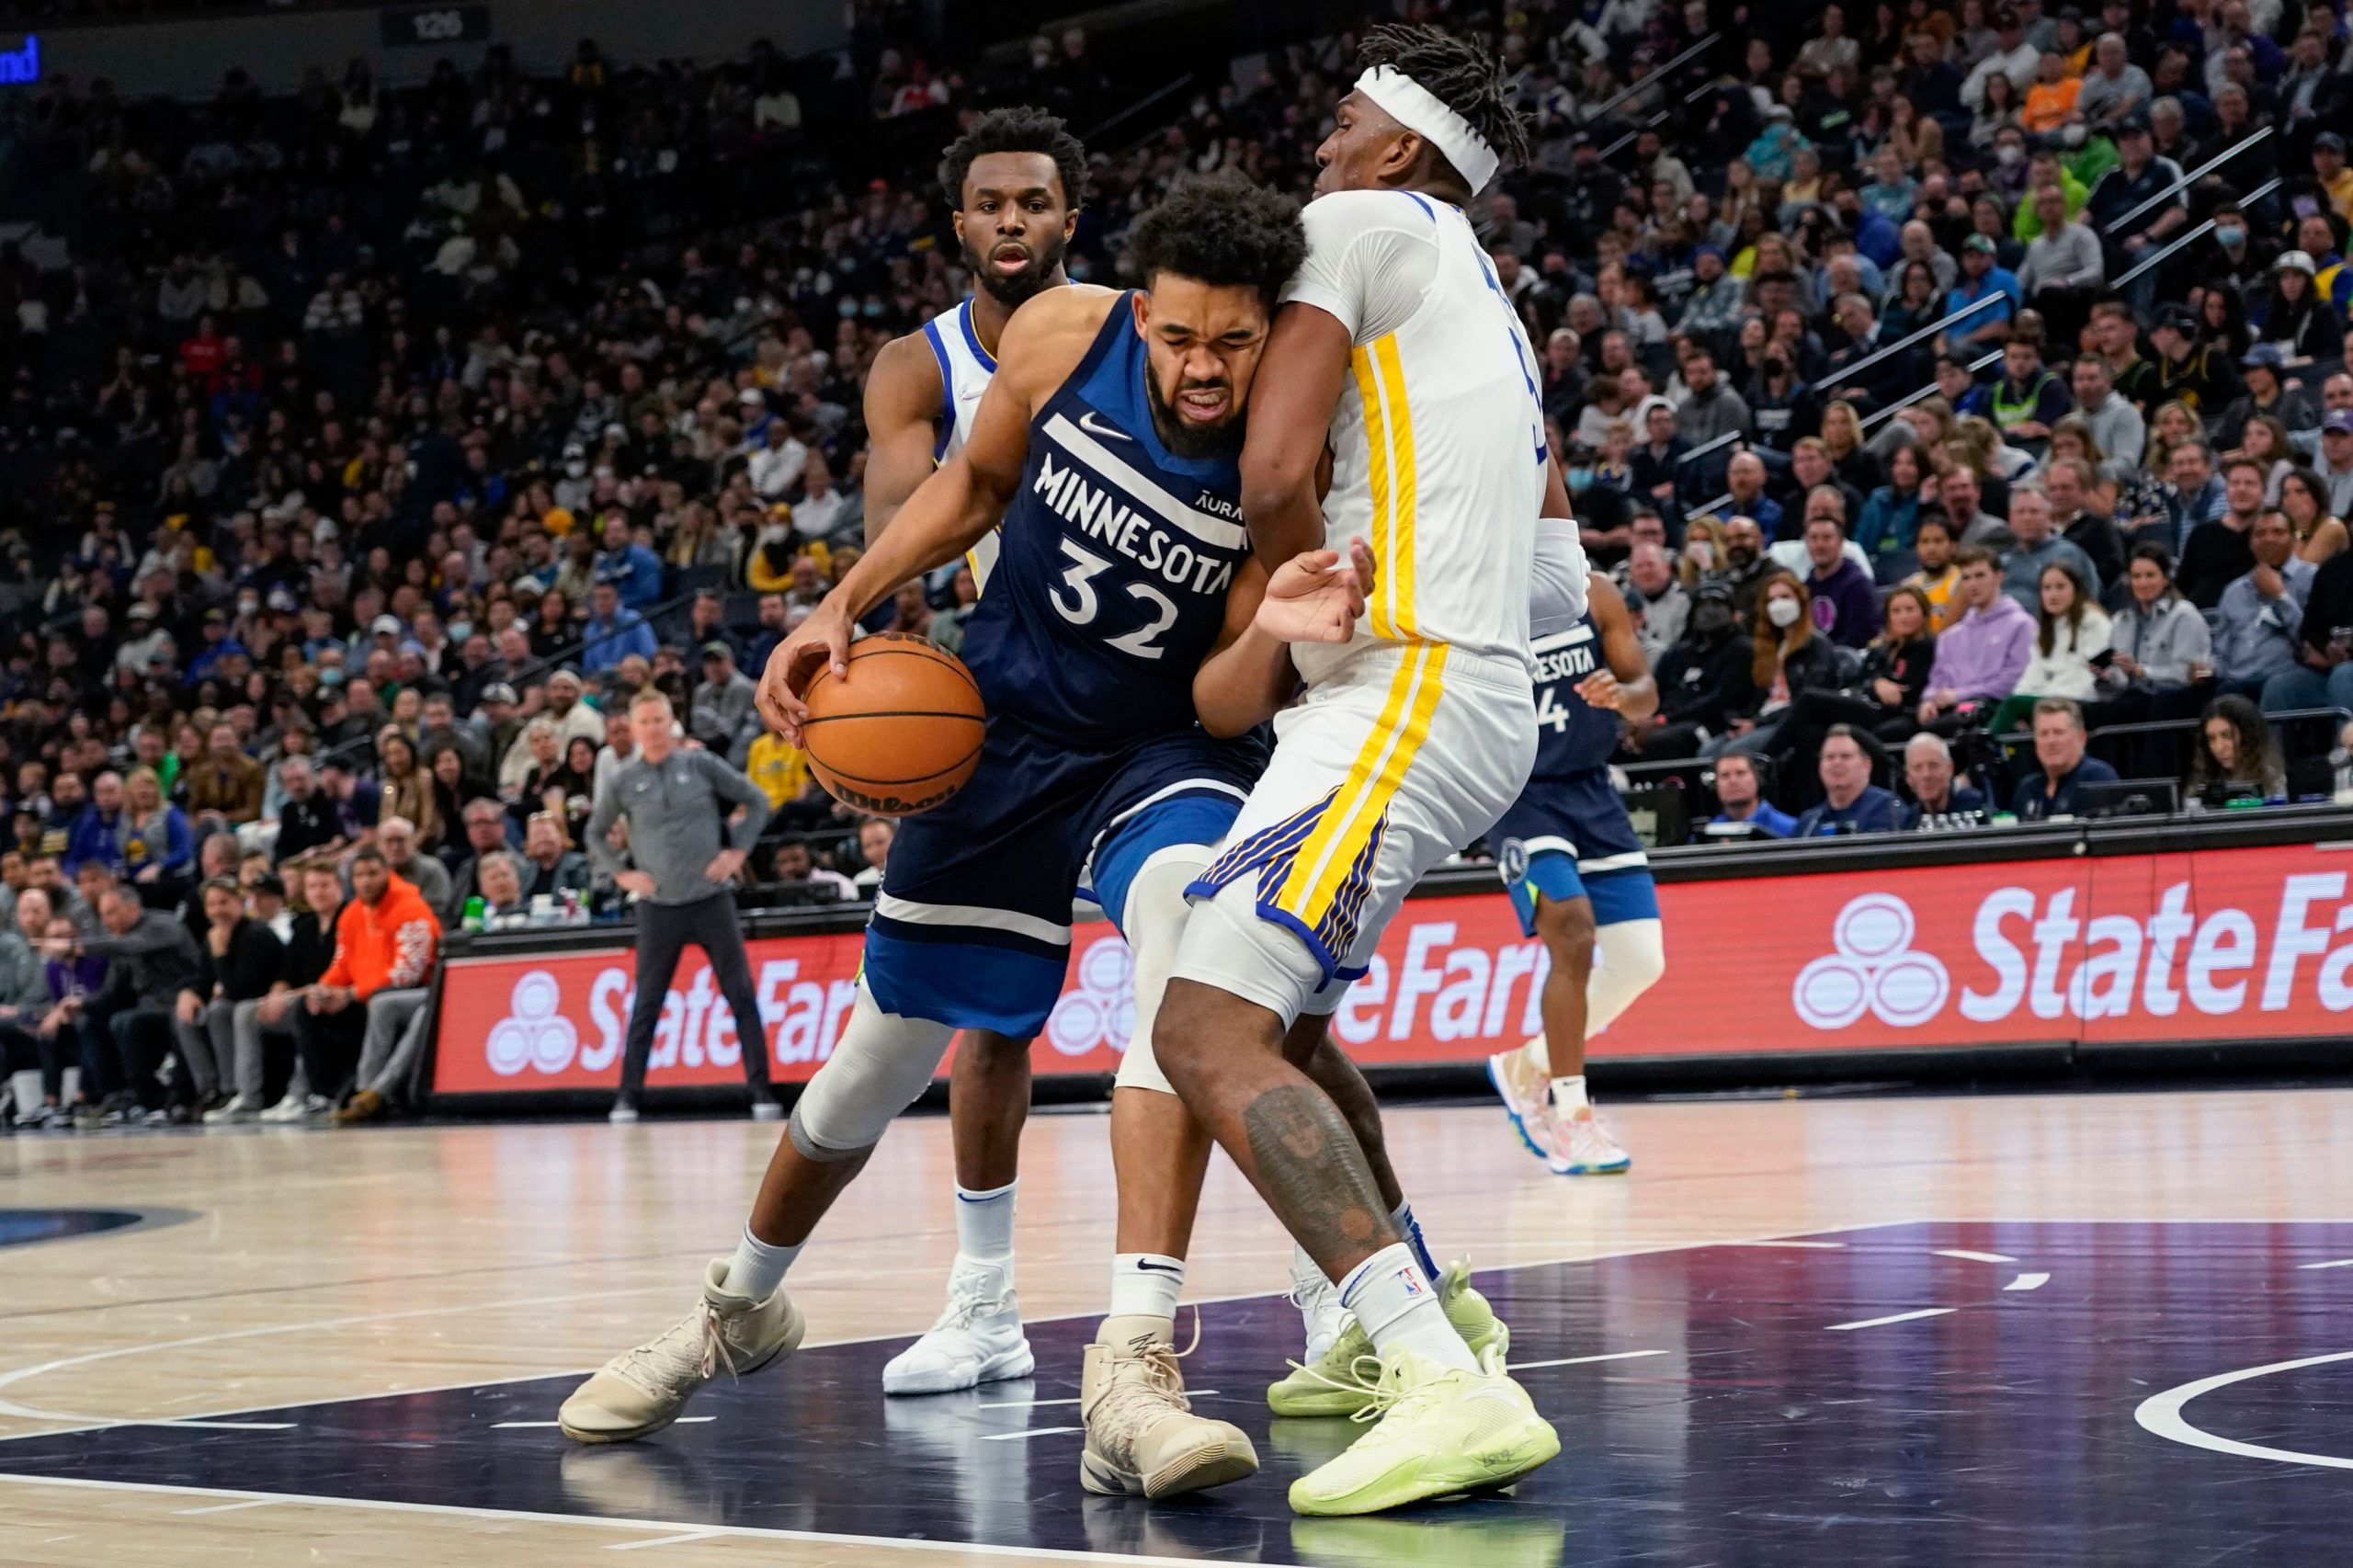 NBA: Towns scores 39 as Wolves inflict Warriors’ 6th loss in 8 games